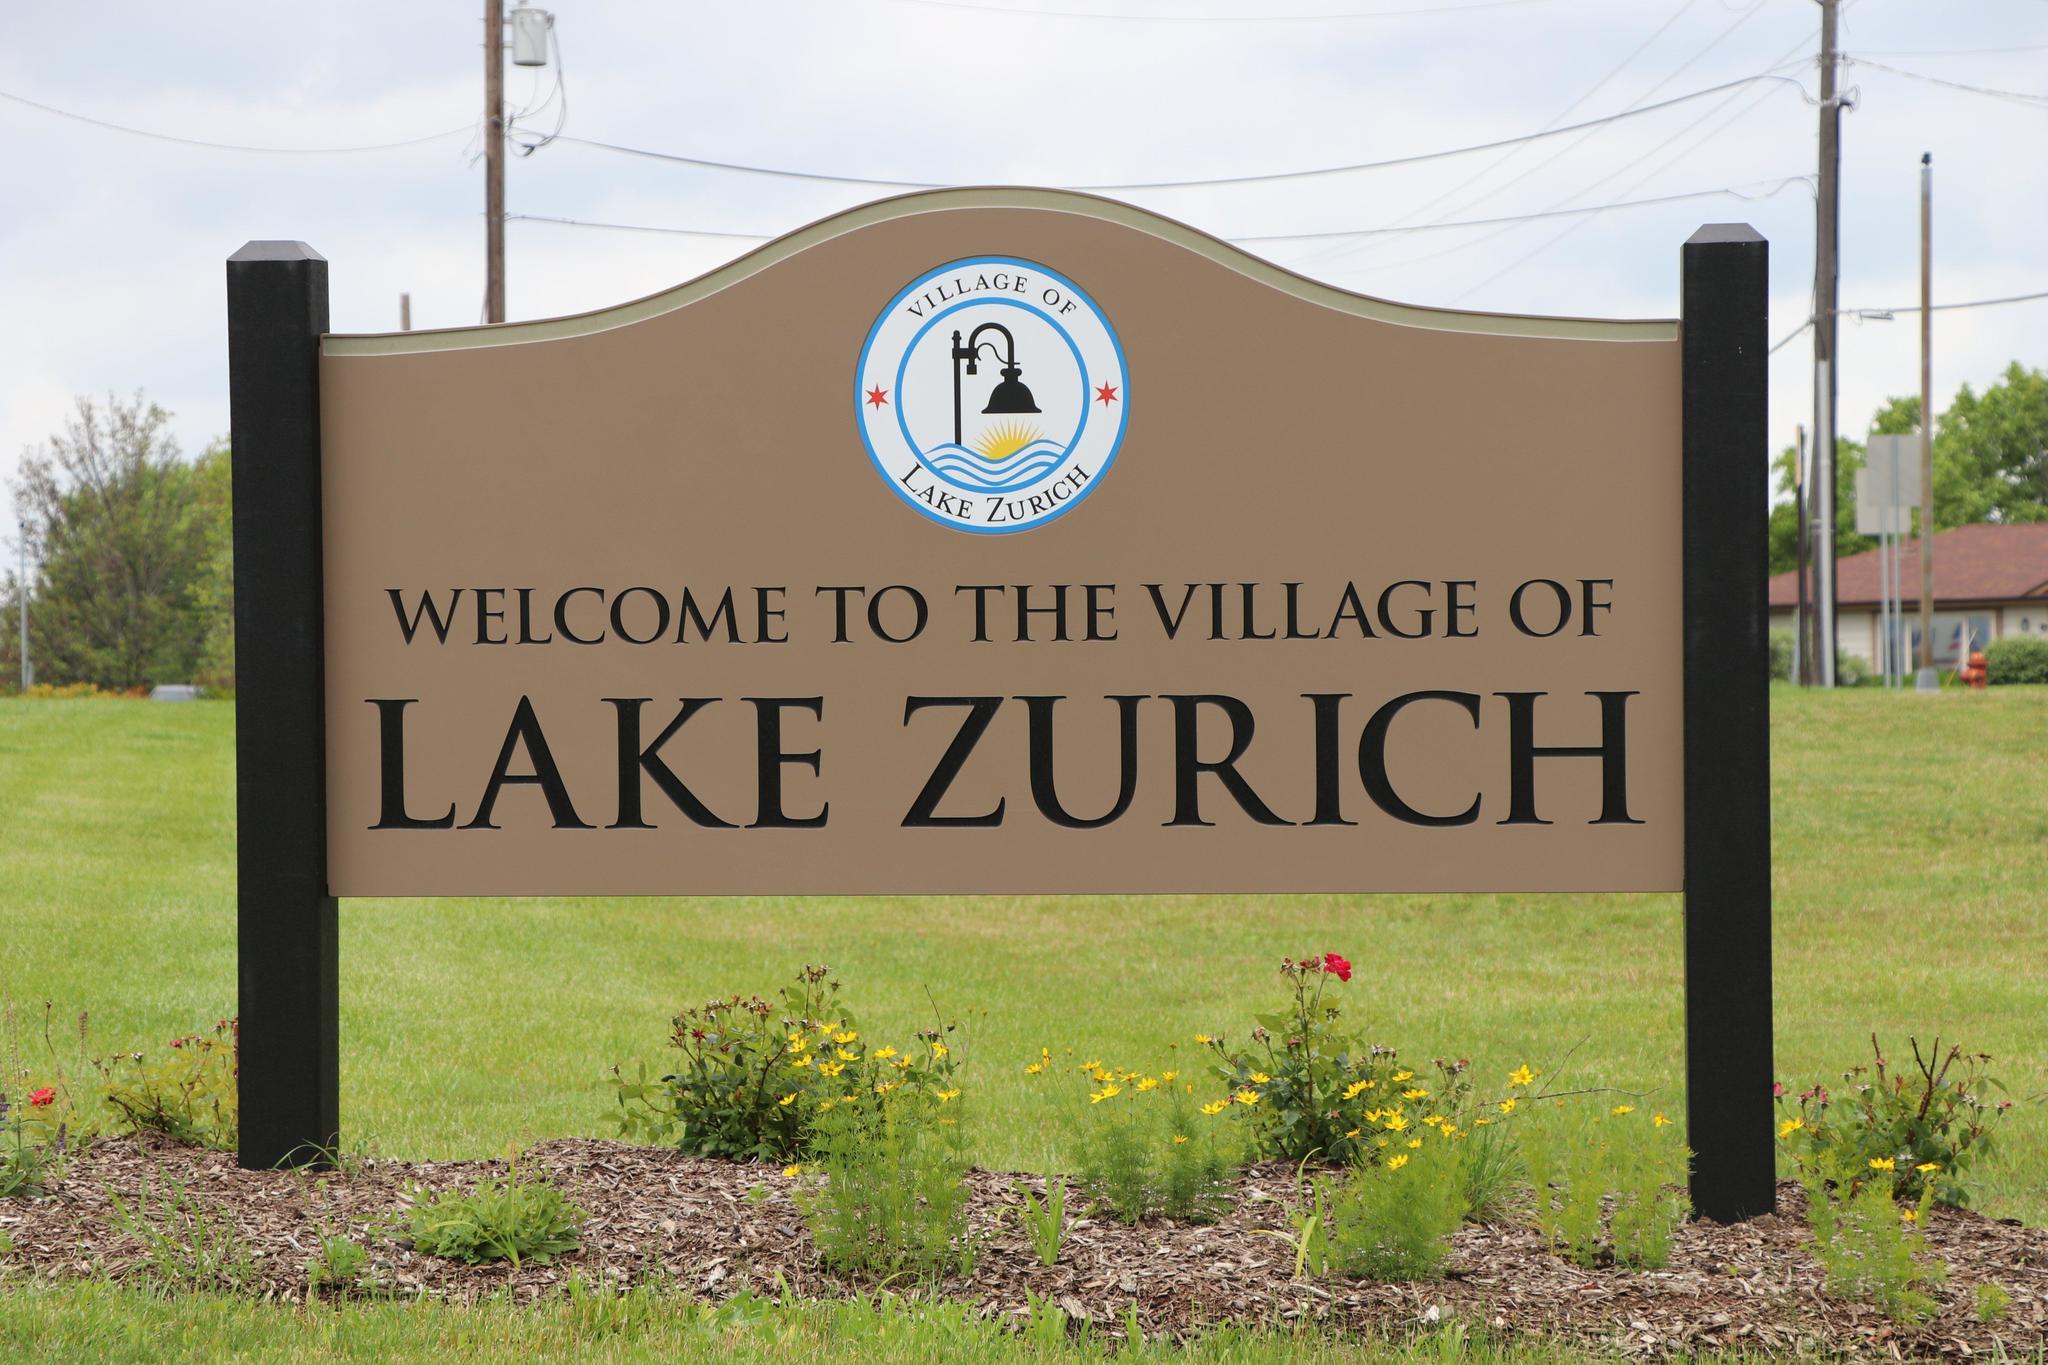 Apartments, retail proposed for downtown Lake Zurich amid trustees